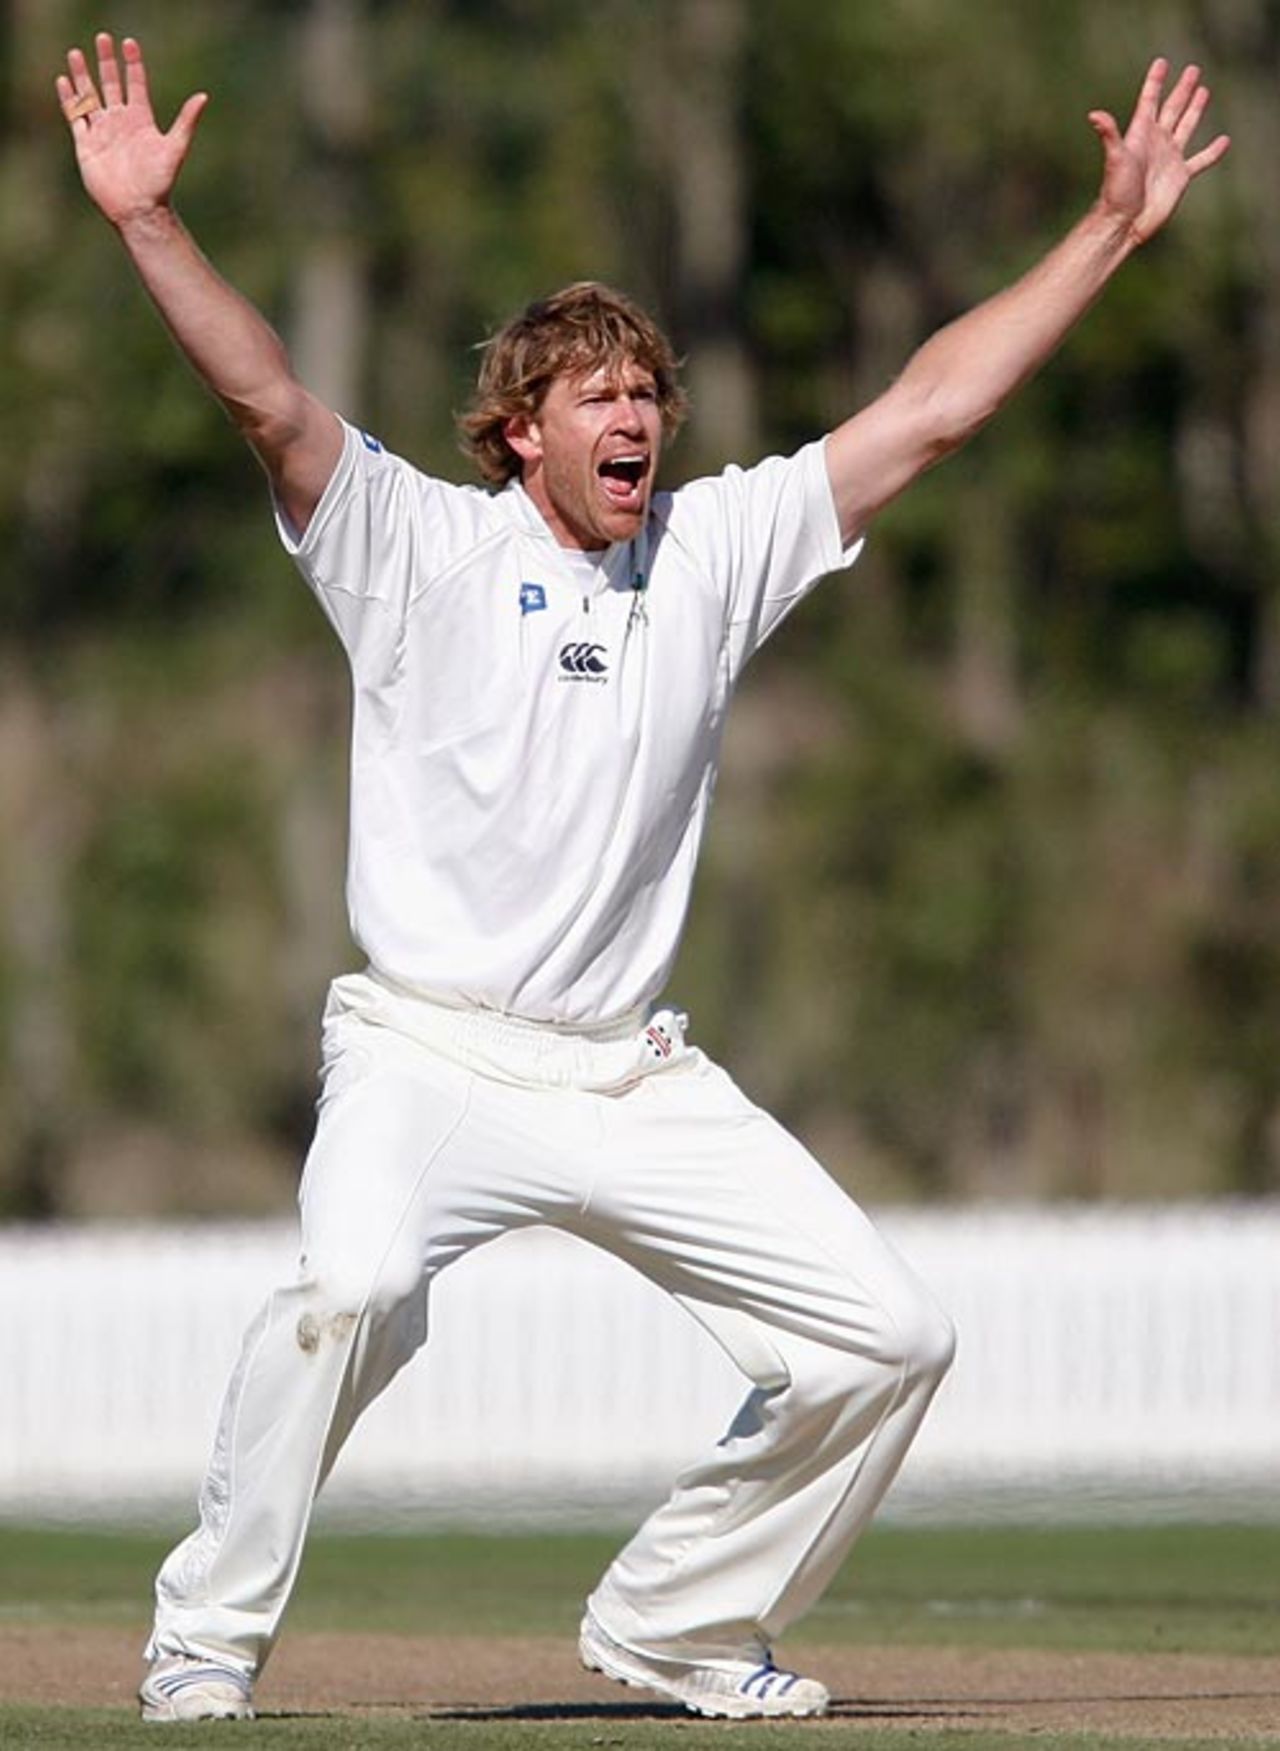 Jacob Oram appeals, Auckland v Central Districts, State Championship final, Bert Sutcliffe Oval, April 10, 2009